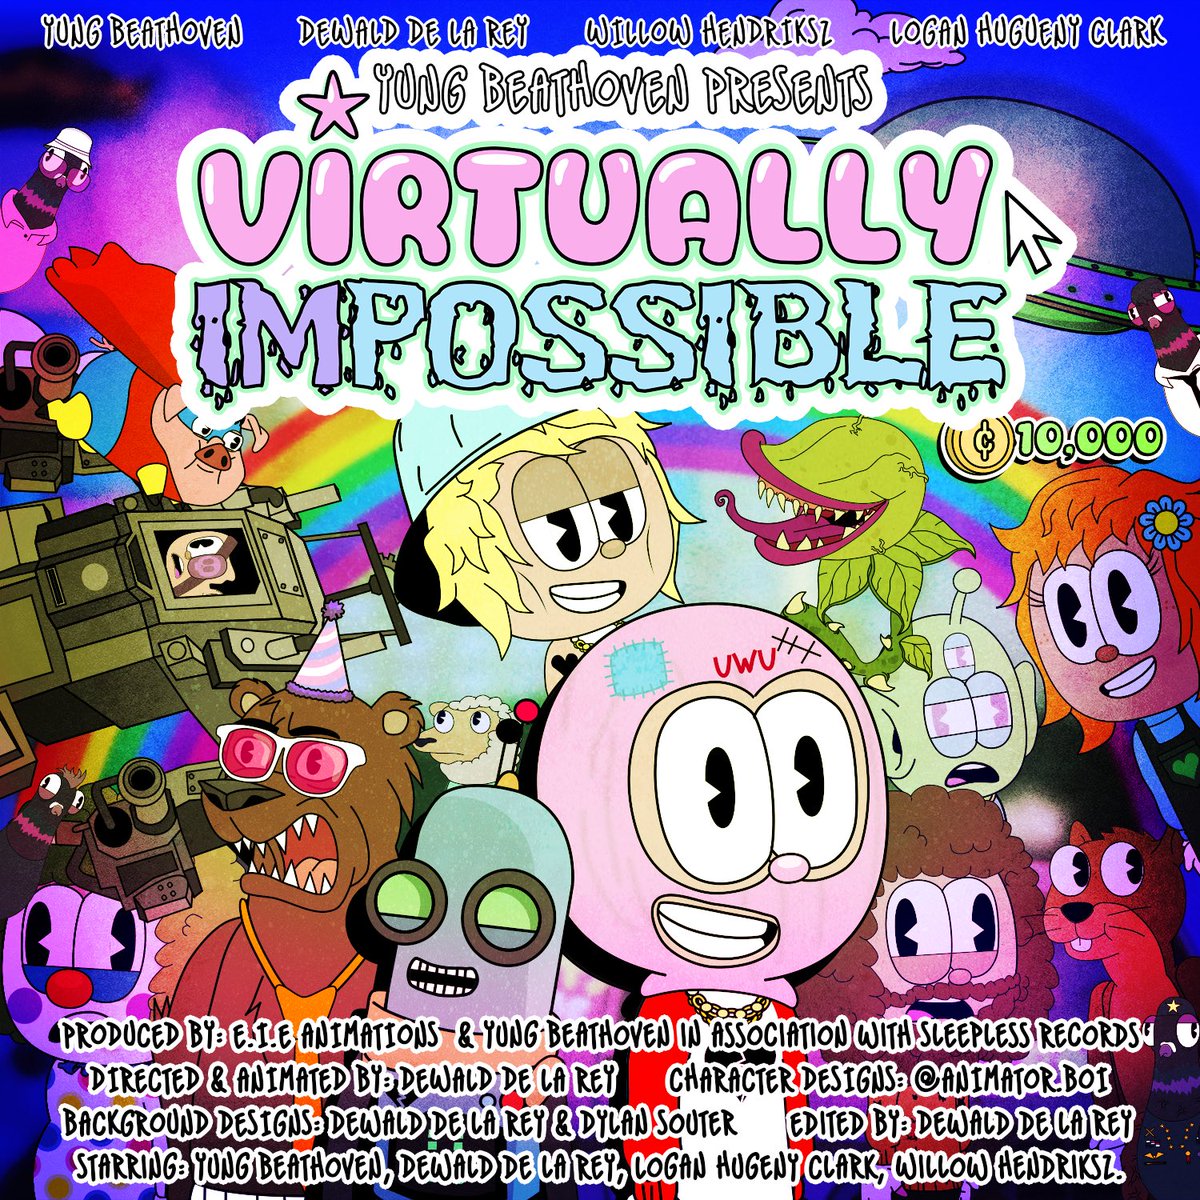 📣 HUGE ANNOUNCEMENT! 📣 

A few months ago I was cast as the lead in ‘Virtually Impossible’, an original animated series created by Dewald de la Ret & produced by myself & @eieproductions 📺